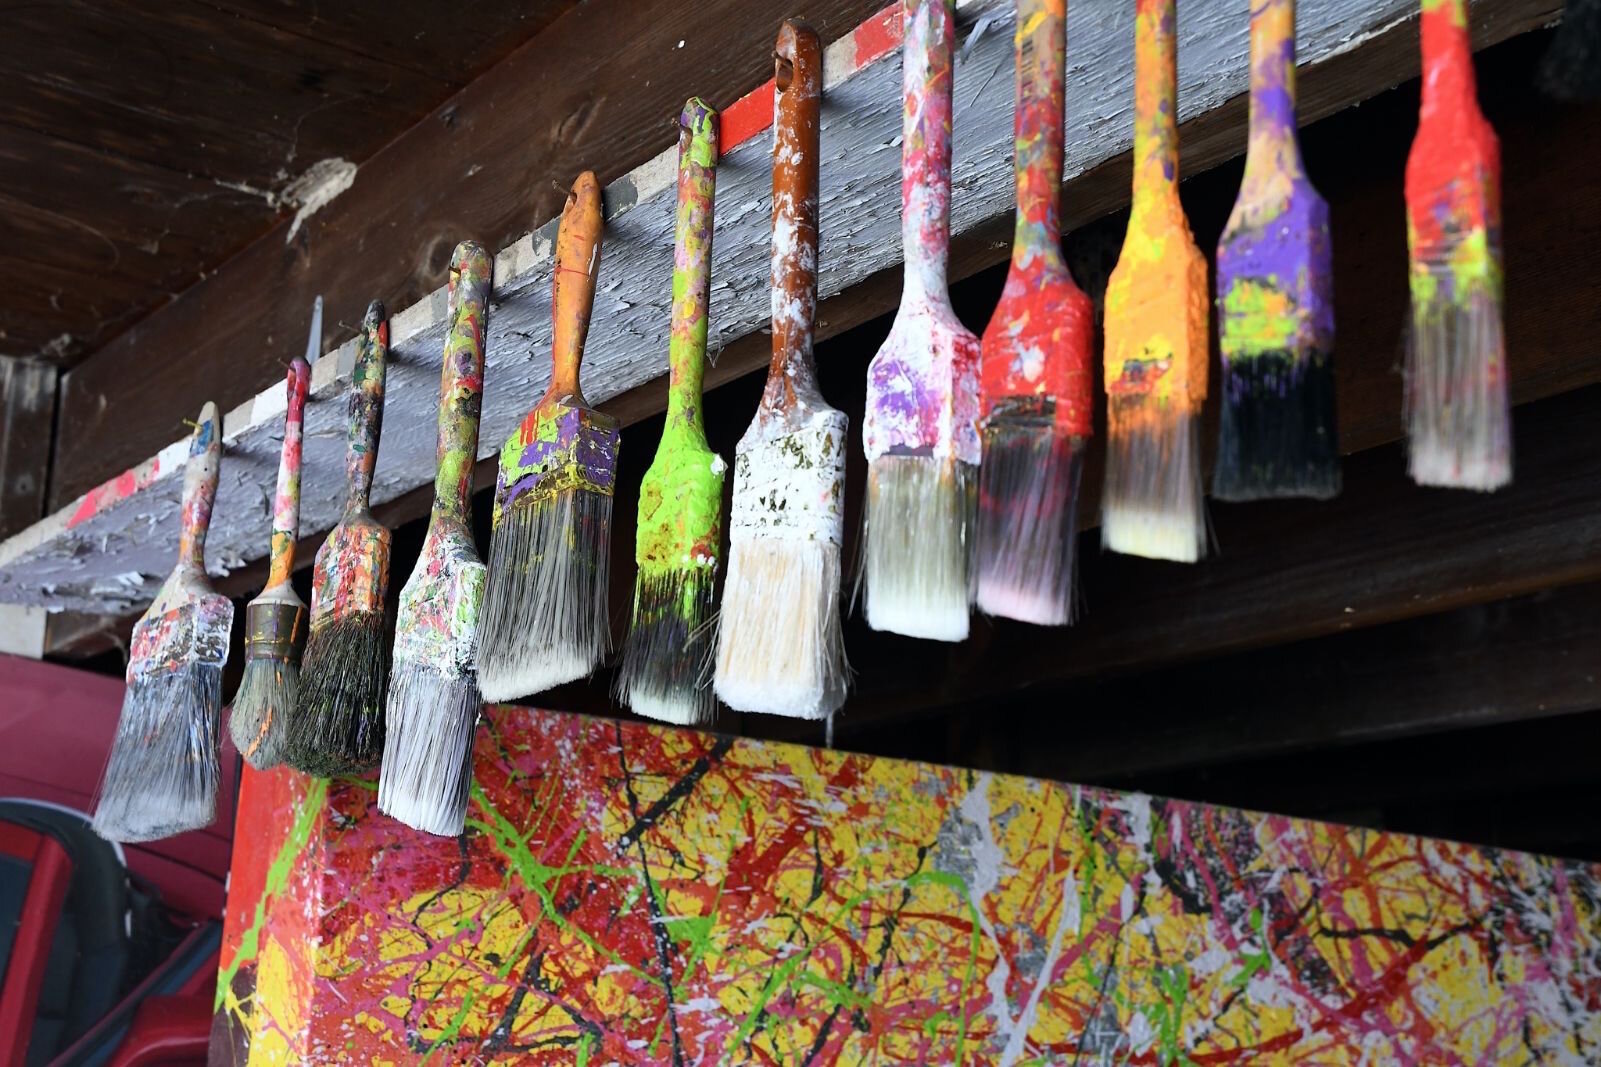 Some of Andrew Freemire’s paint brushes in his garage.